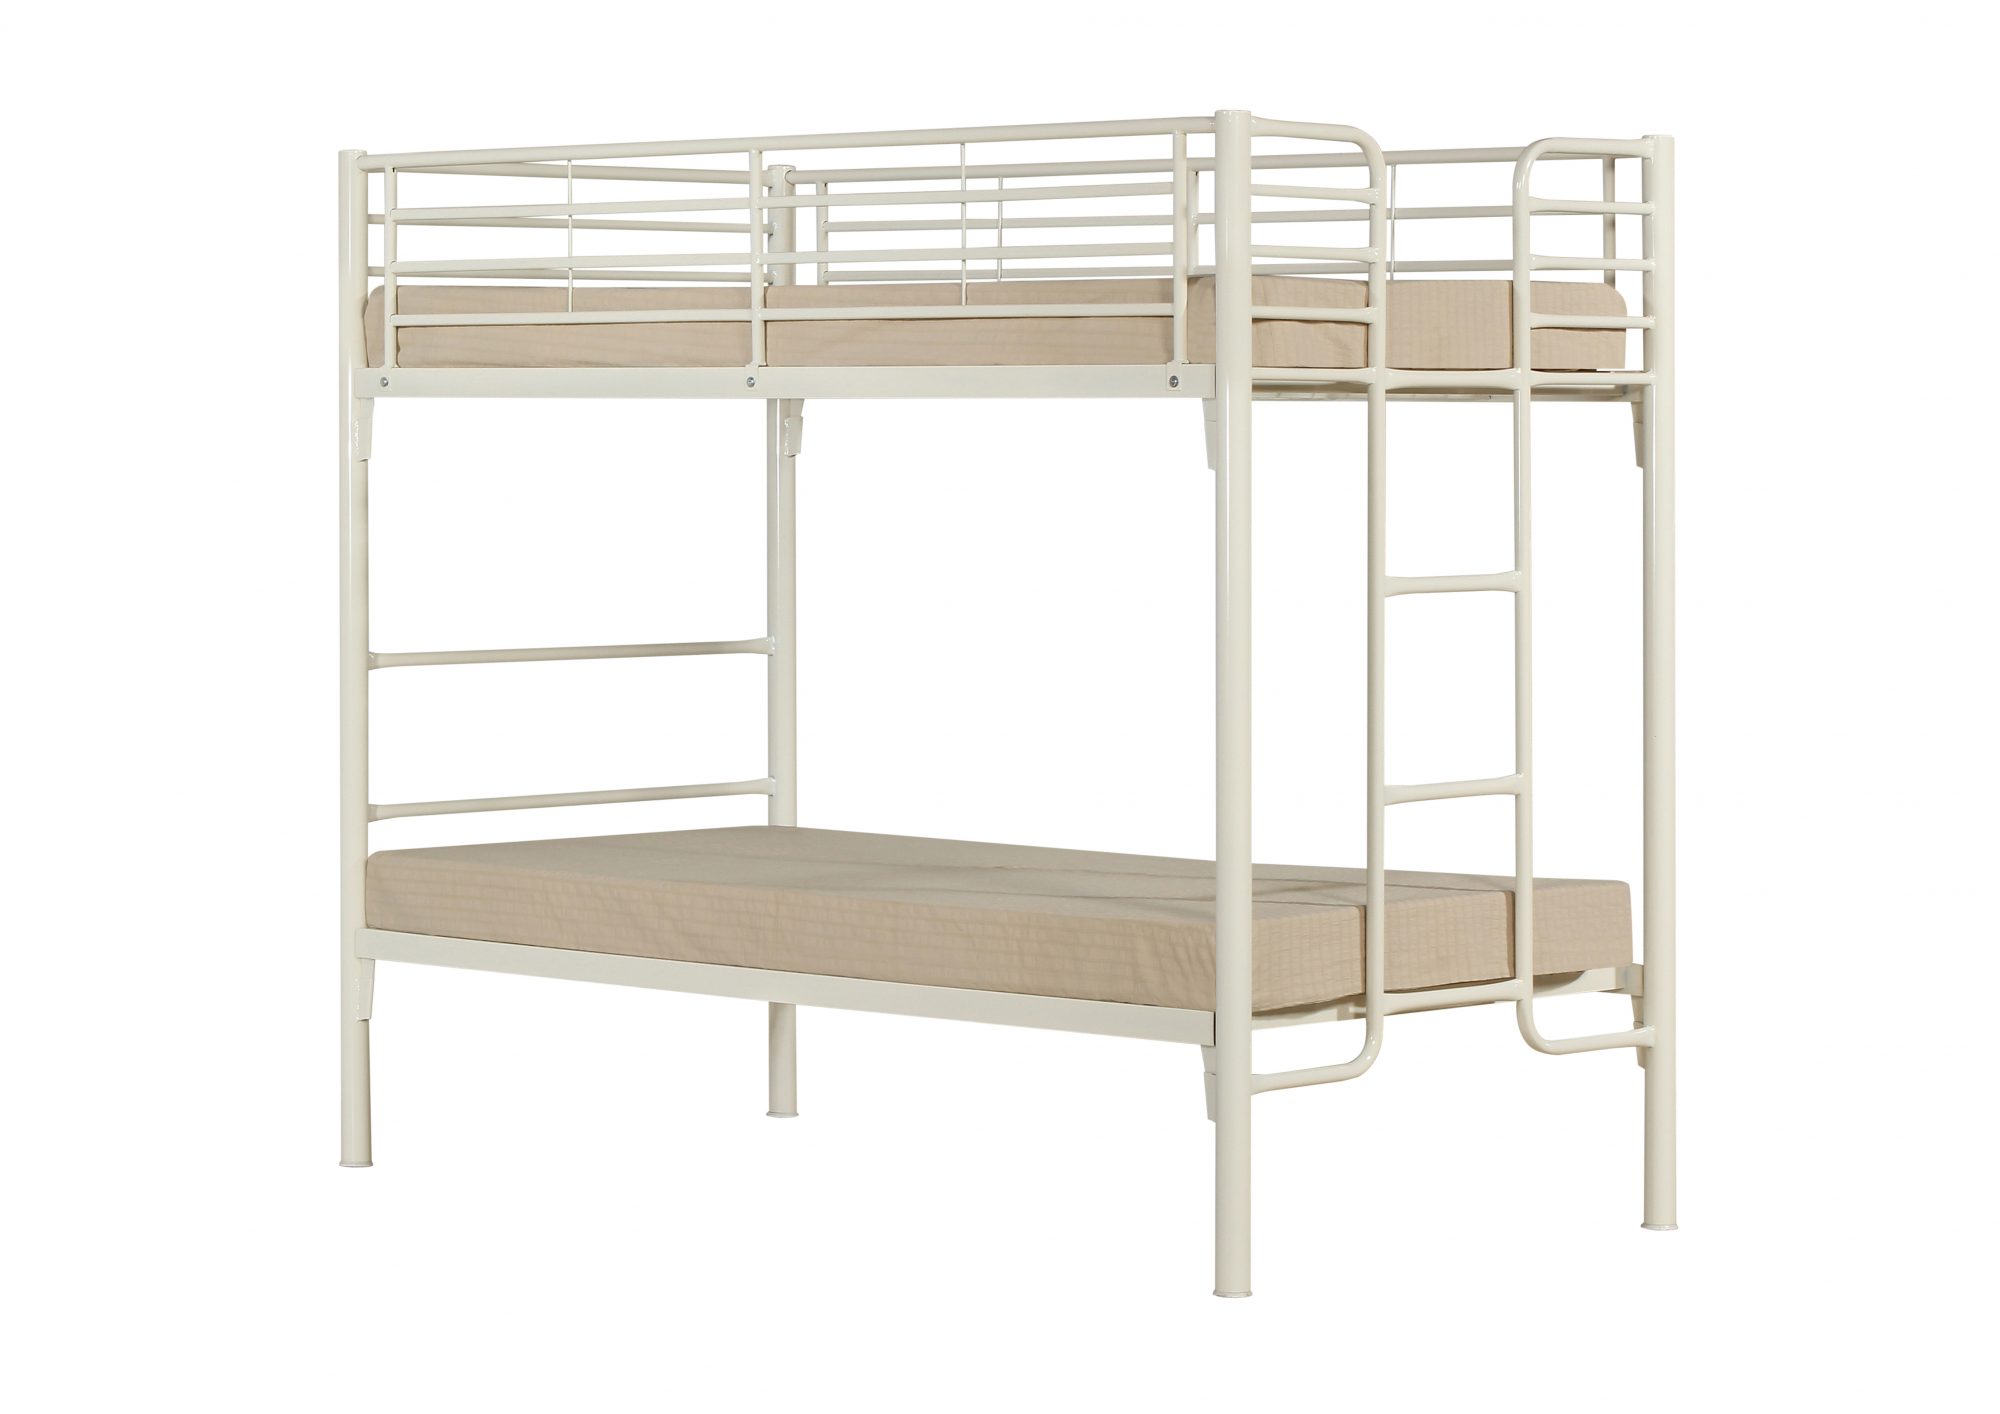 Army Commercial Grade Single Bunk Beds, Army Bunk Beds